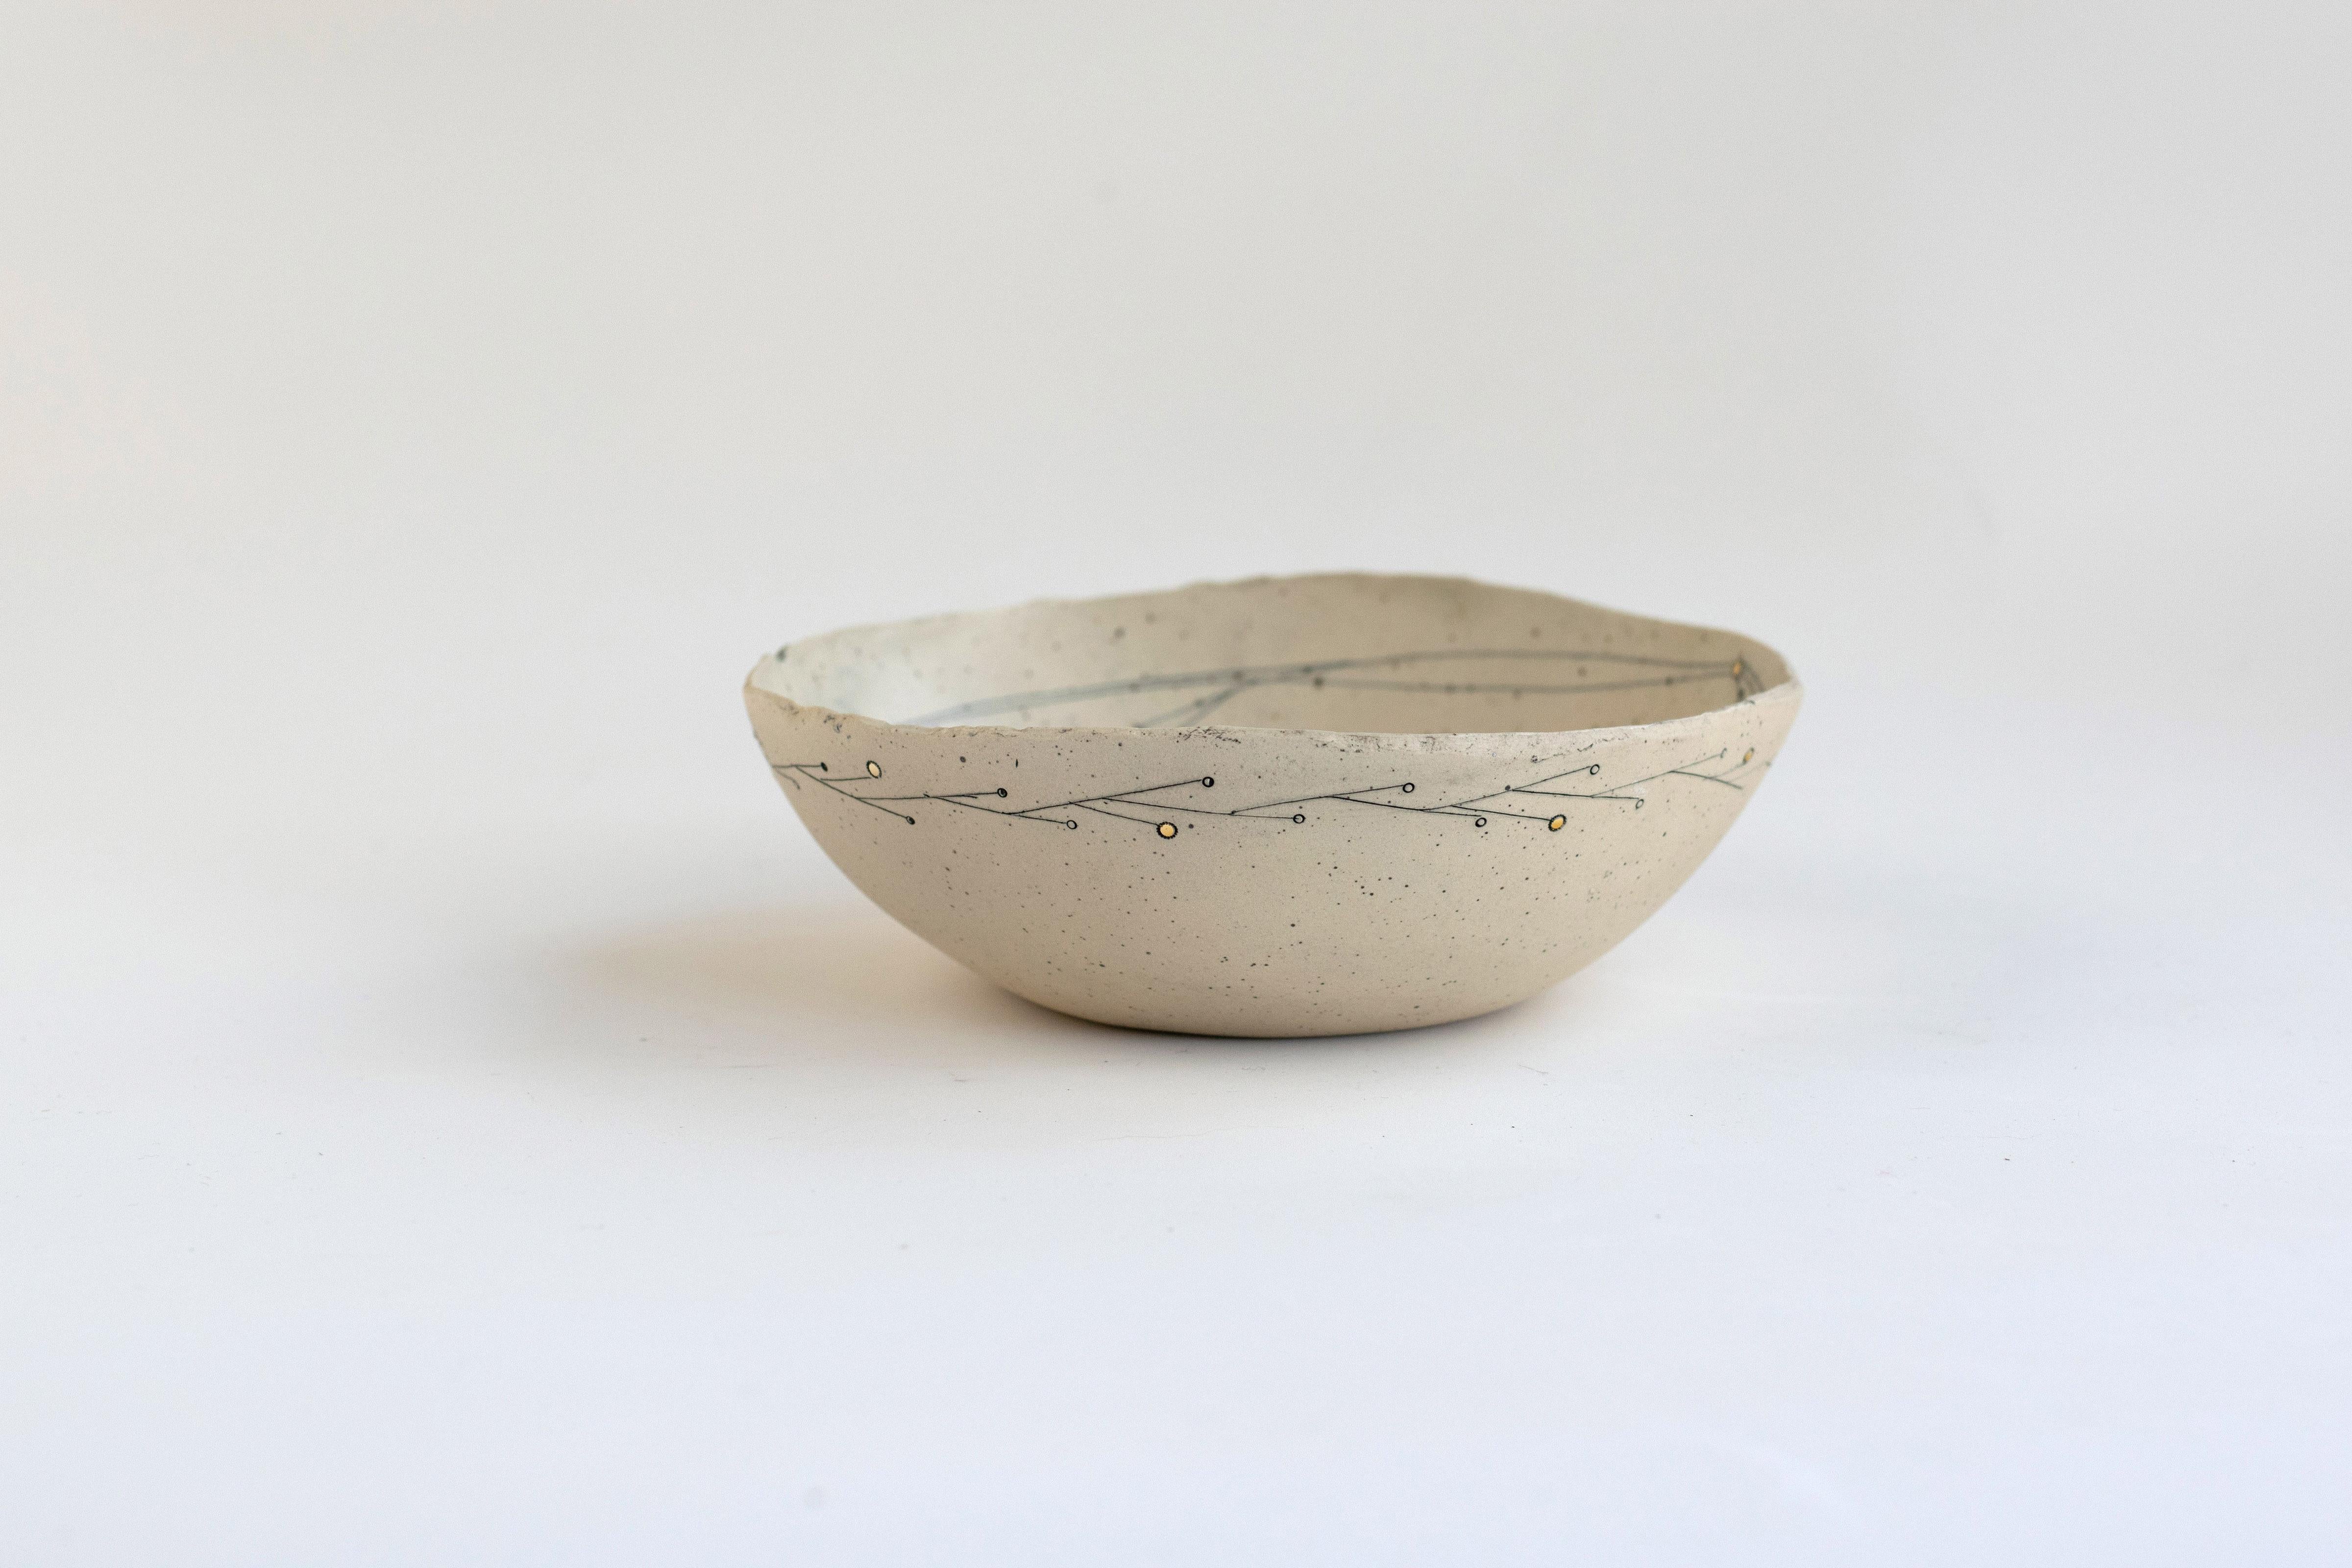 464-G Hand crafted golden promise stoneware bowl with 22kt gold exterior Detail


A delicate hand-crafted bowl, organic in shape with a torn clay edge in natural speckled stoneware clay.
Part of the Golden Promise Series- a theme of abstracted